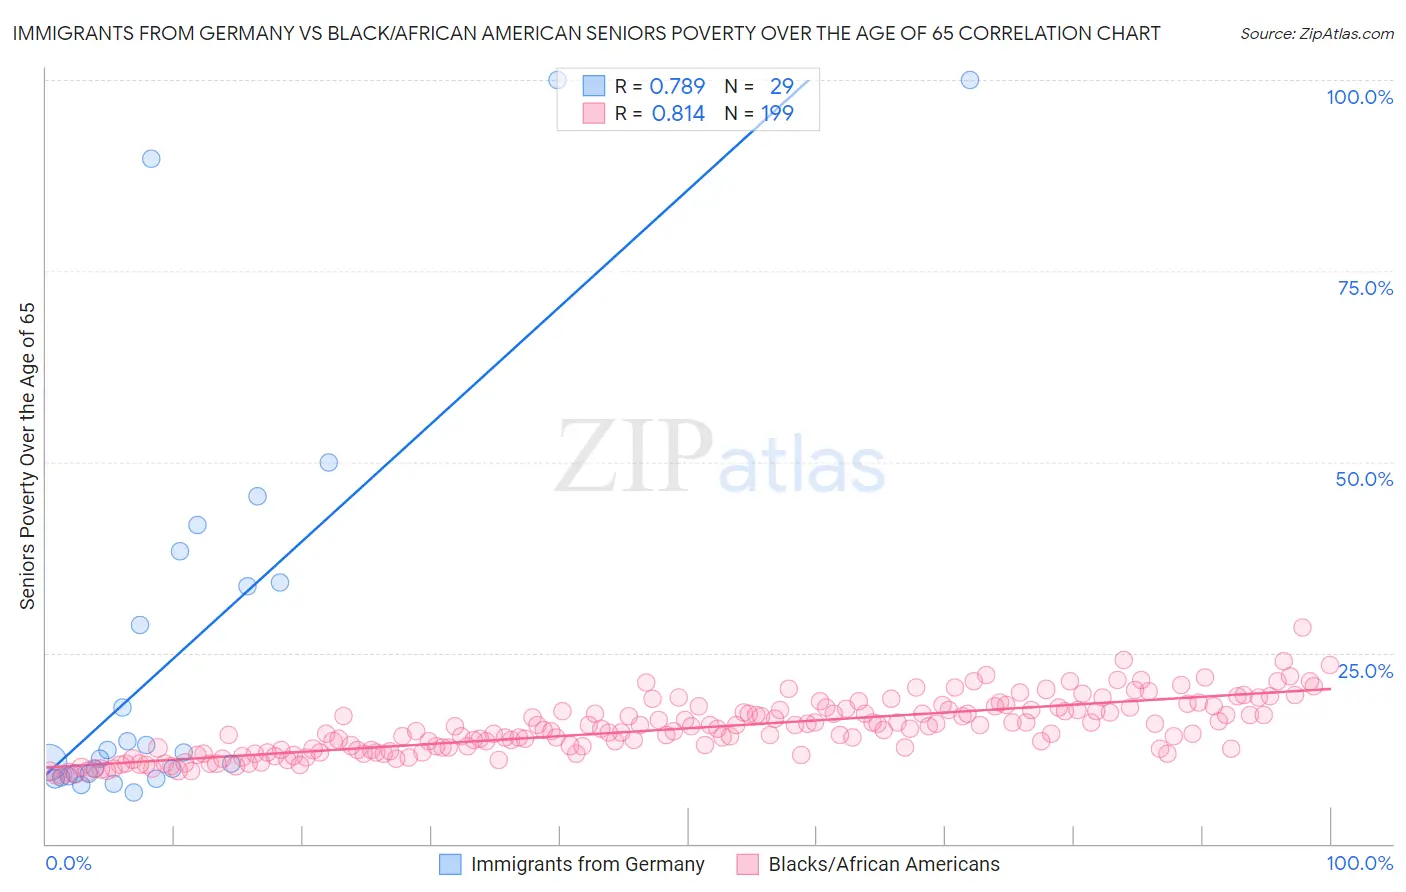 Immigrants from Germany vs Black/African American Seniors Poverty Over the Age of 65